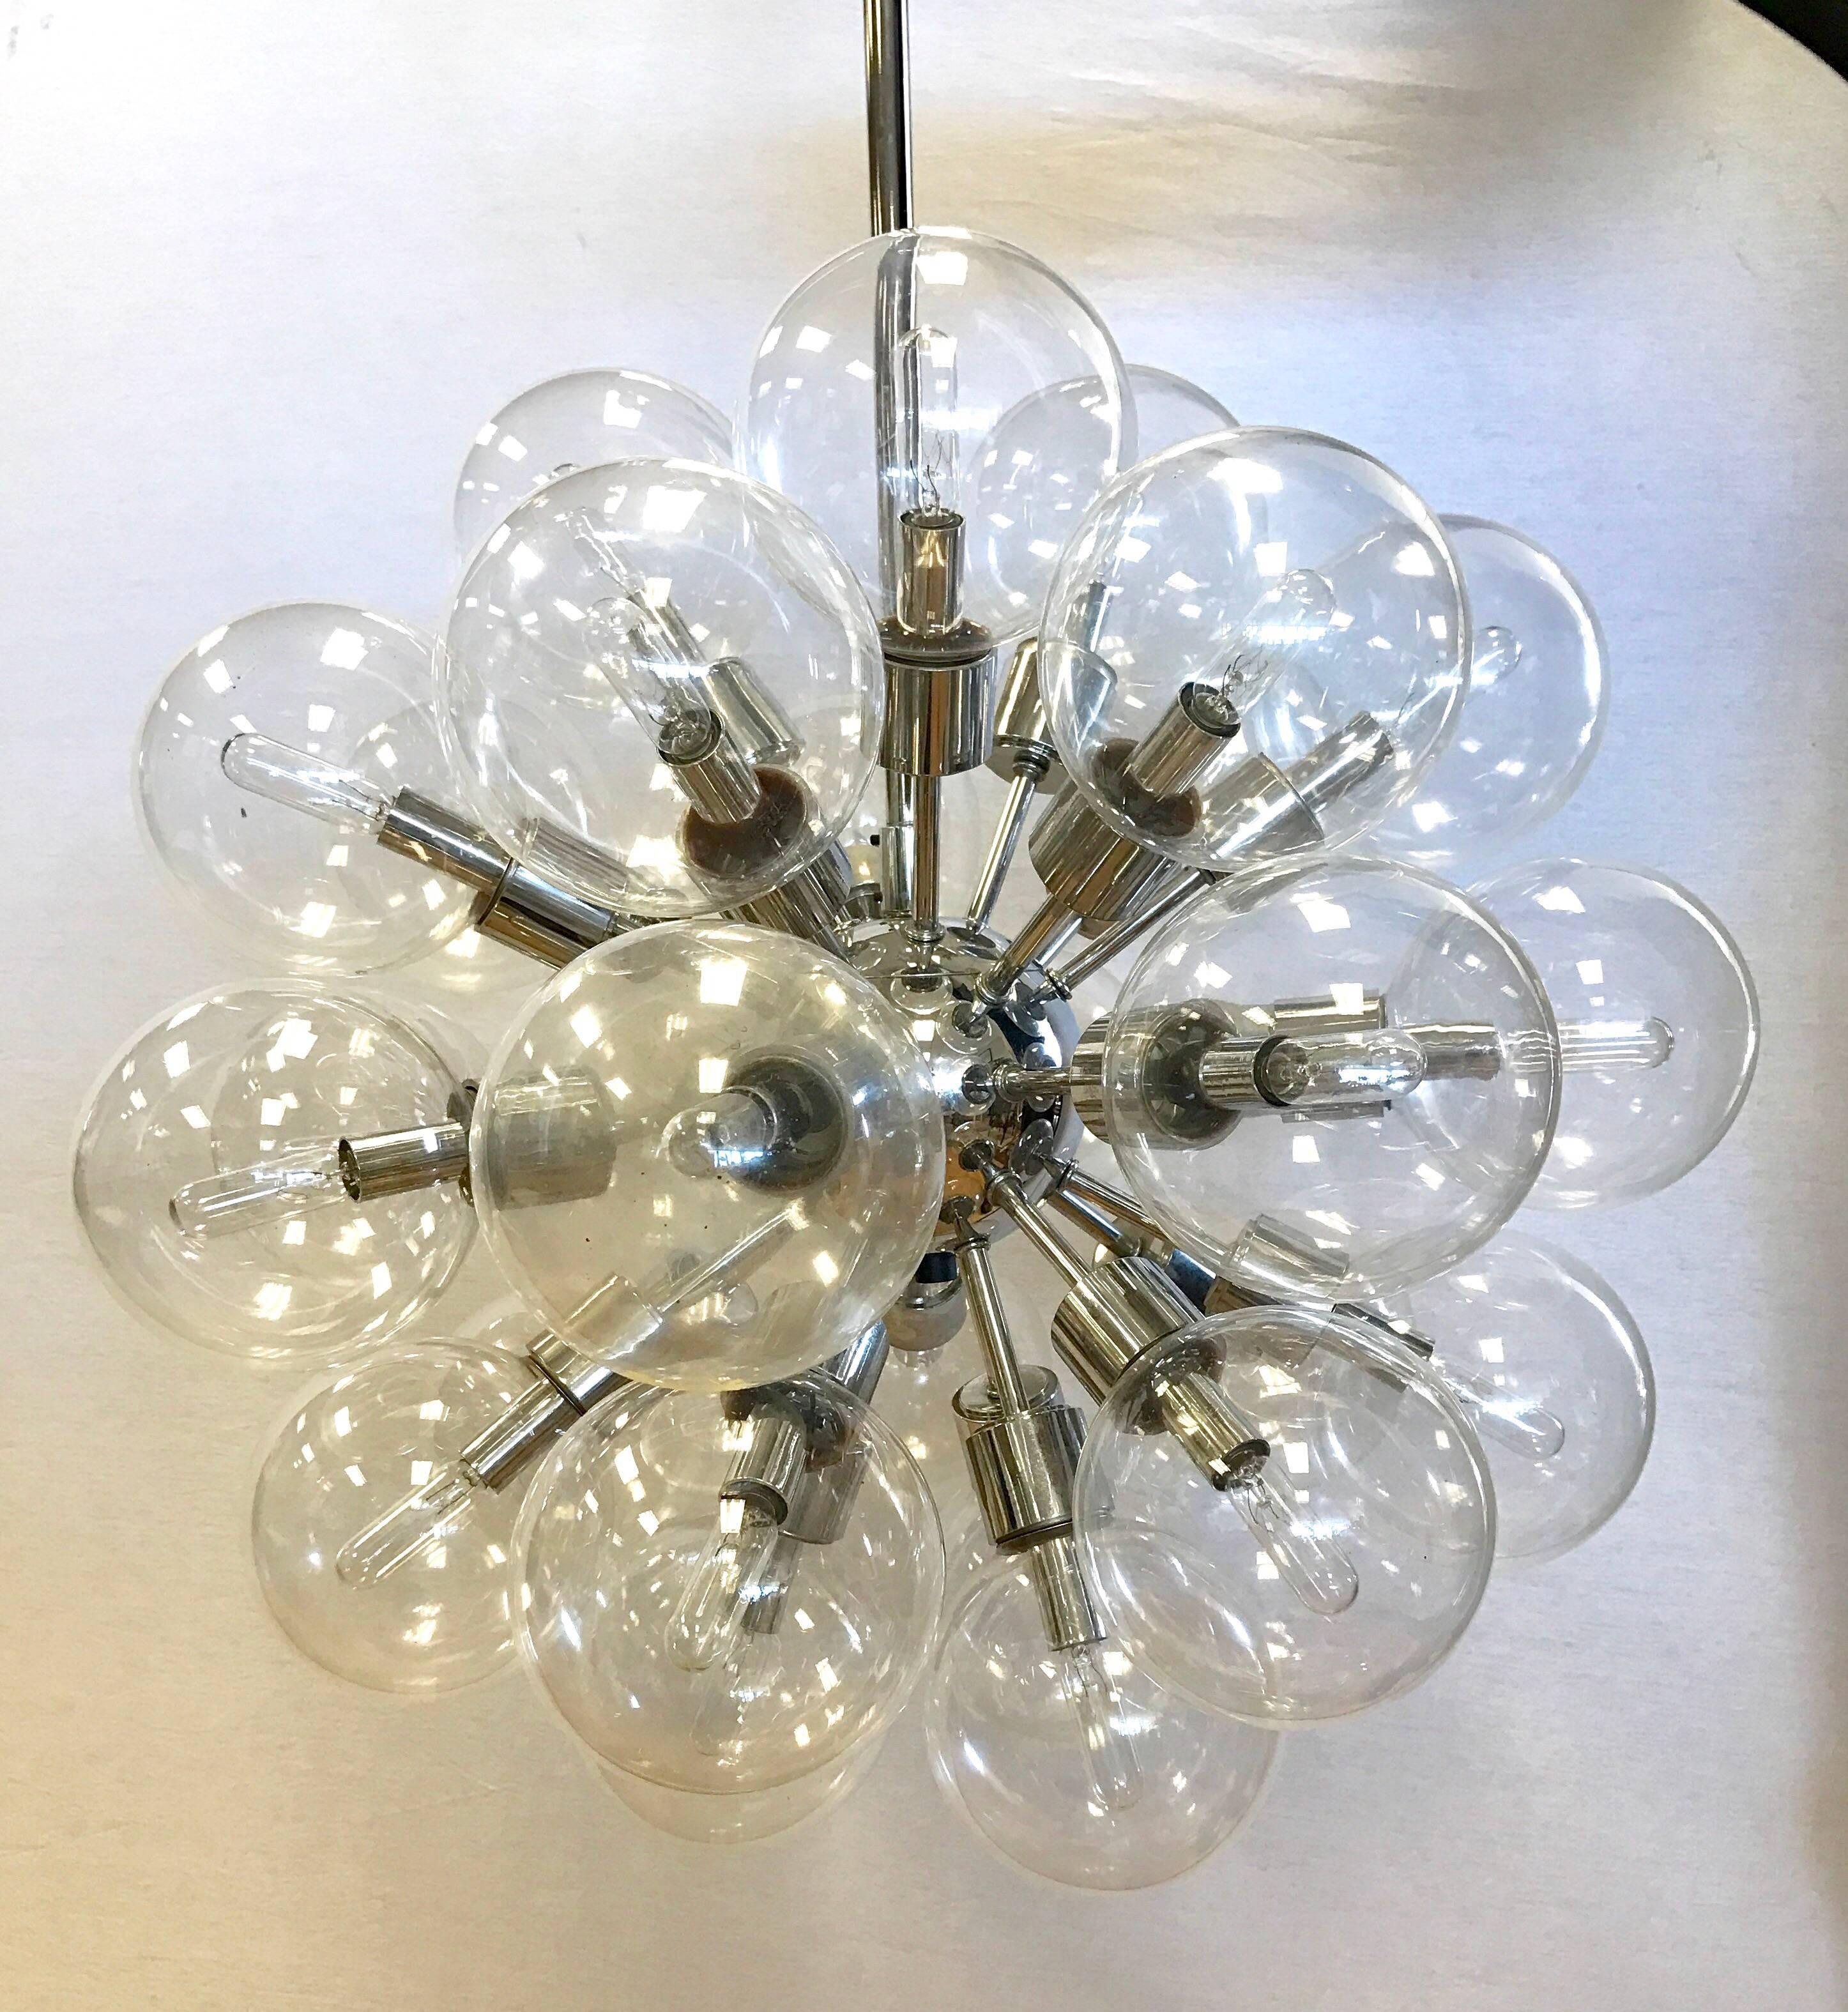 Coveted set of three matching Mid-Century Modern Lightolier thirty-light Sputnik chandeliers, circa 1960s. Feature 30 original glass globes on polished chrome spokes radiating from a central chrome nucleus. They are made of polished chrome and has